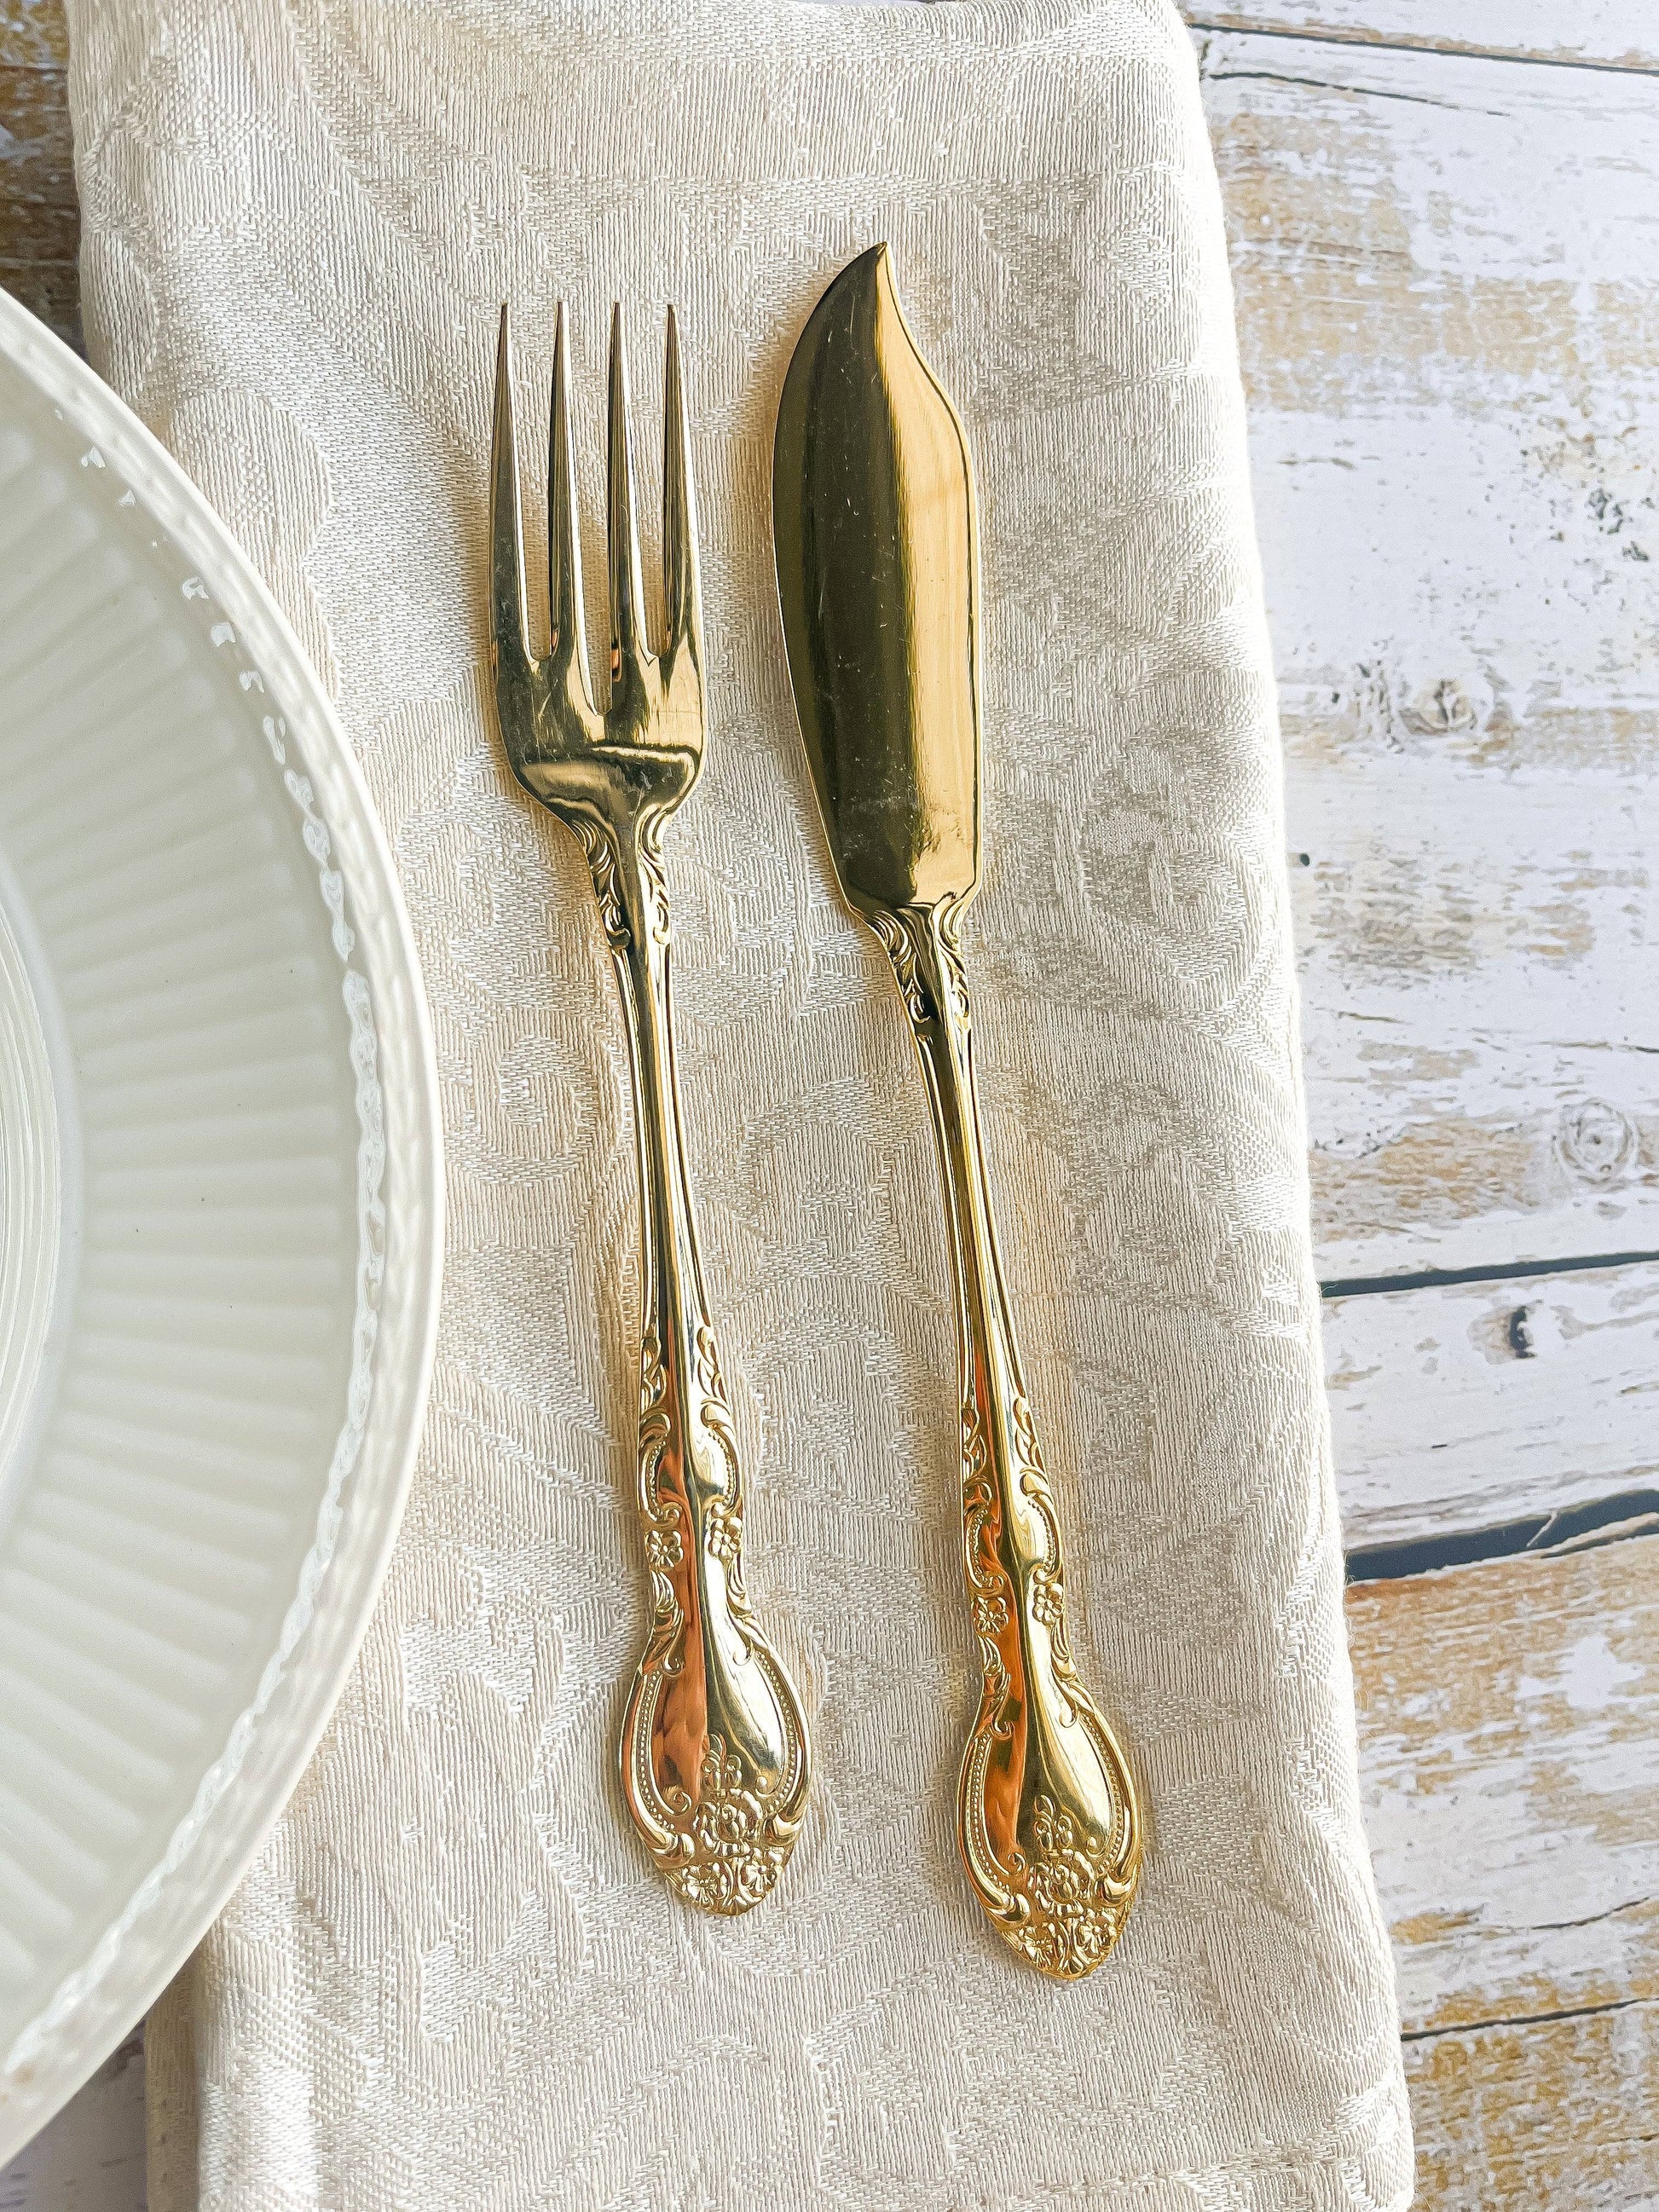 Oneida Gold-Plated Set of 6 Fish Forks and 6 Fish Knives - 'Golden Malmaison' Pattern - SOSC Home